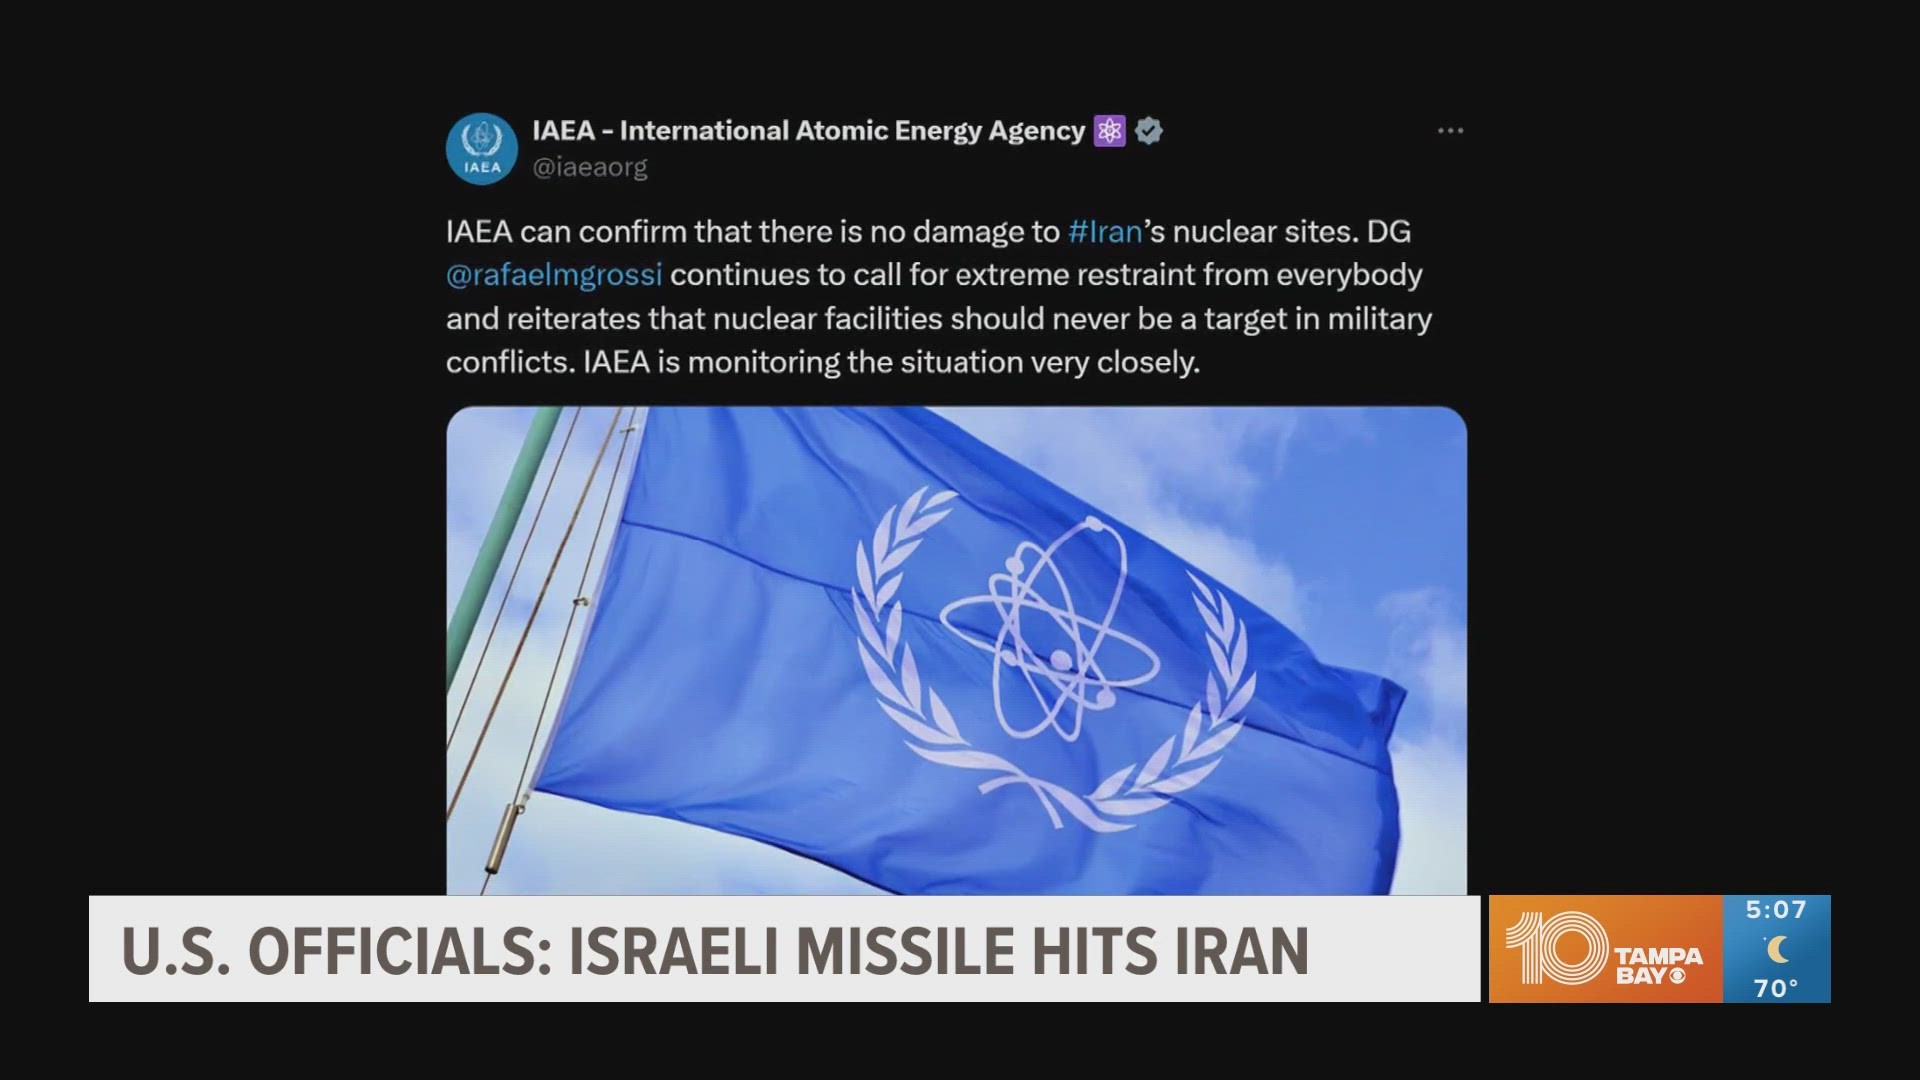 Tensions in the region have escalated after Iran attacked Israel a few days ago.